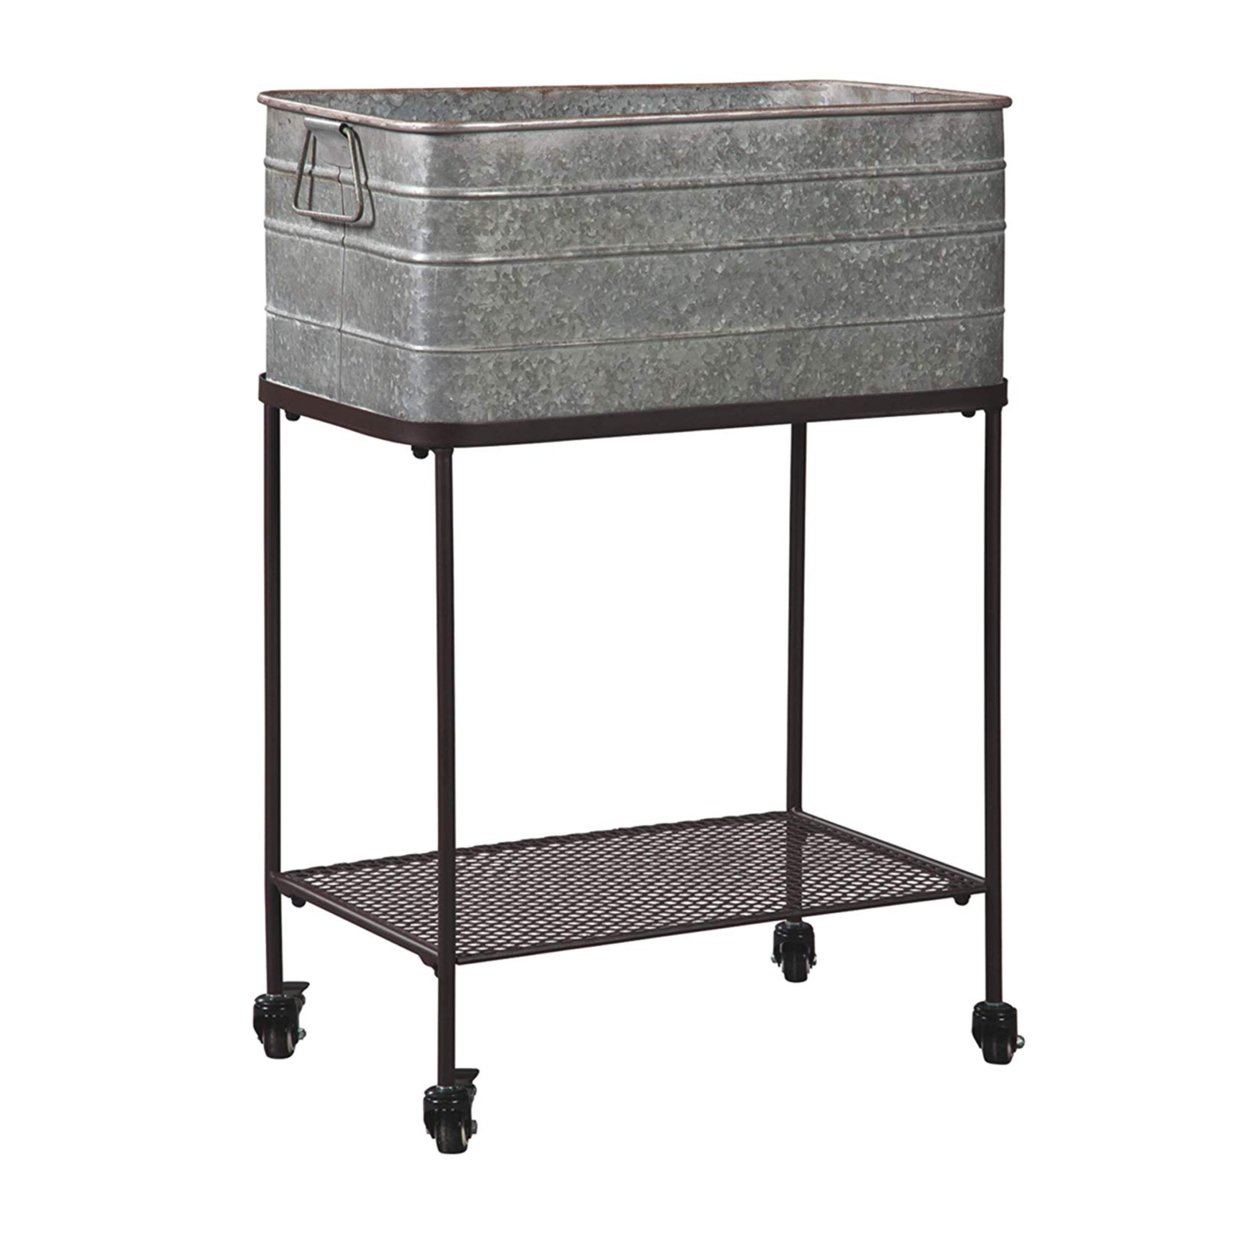 Rectangular Metal Beverage Tub With Stand And Open Grid Shelf, Gray And Black- Saltoro Sherpi